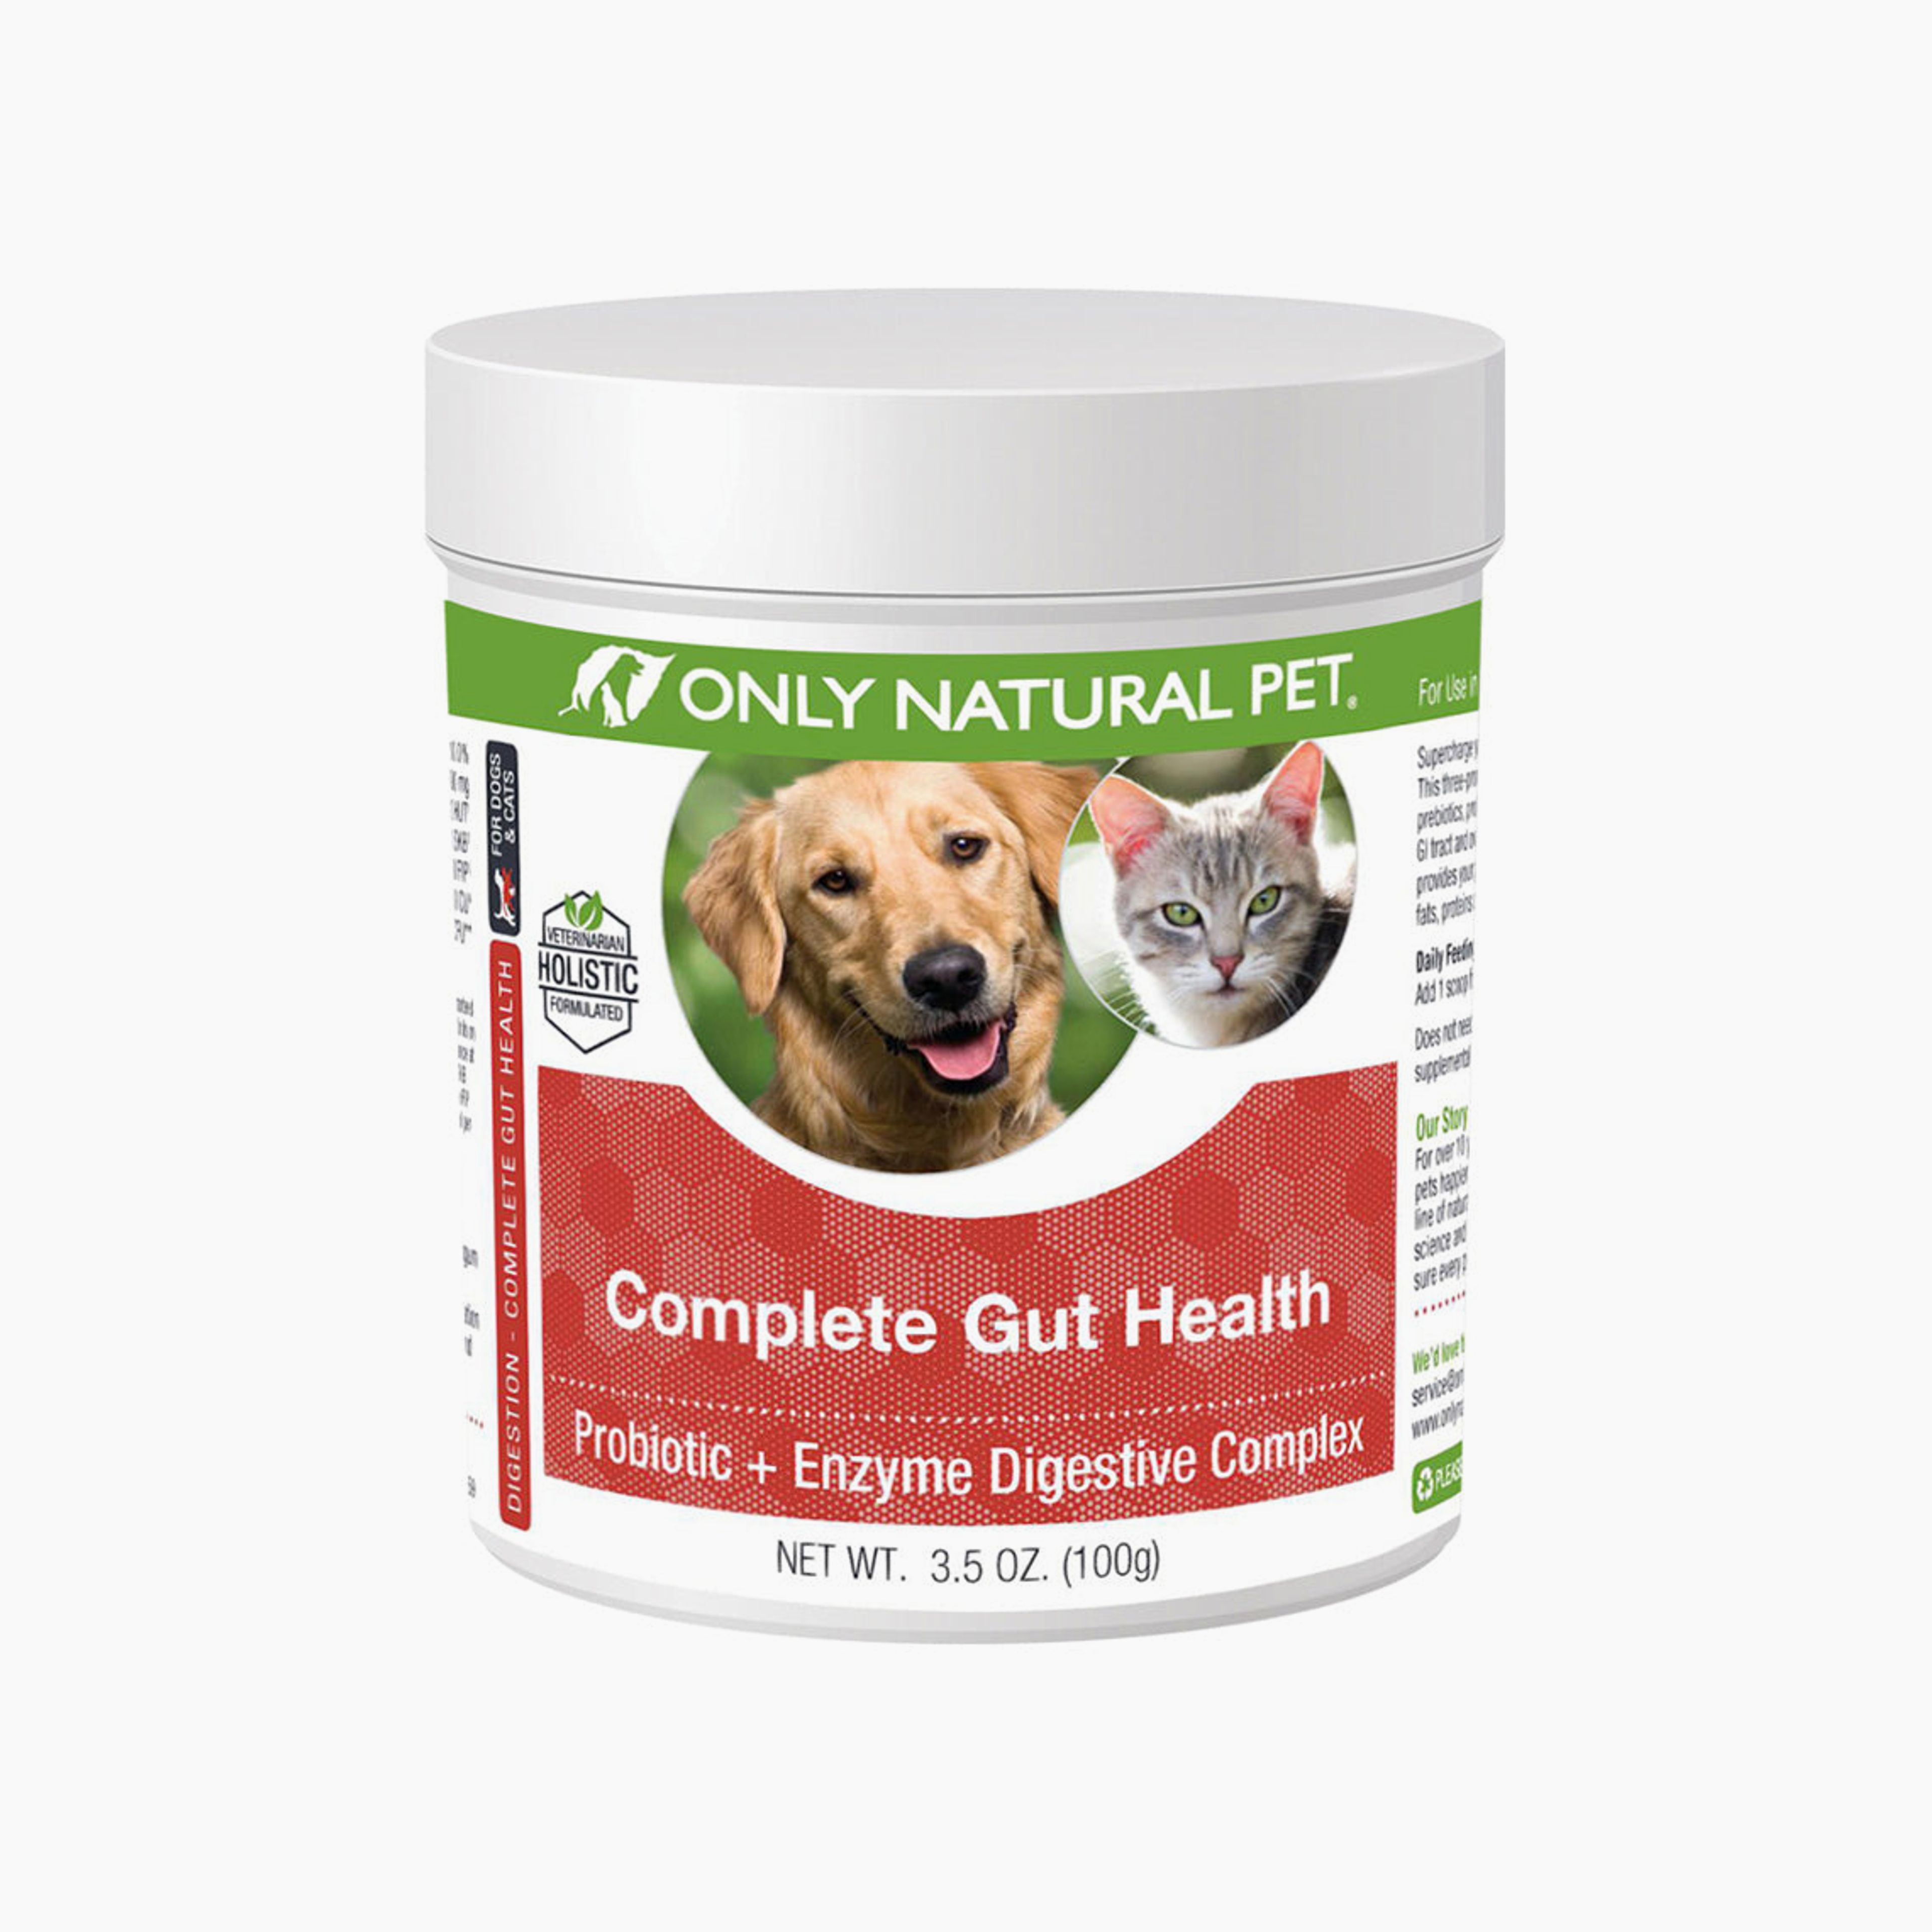 Only Natural Pet Complete Gut Health Complex Probiotics & Digestive Enzymes for Dogs & Cats